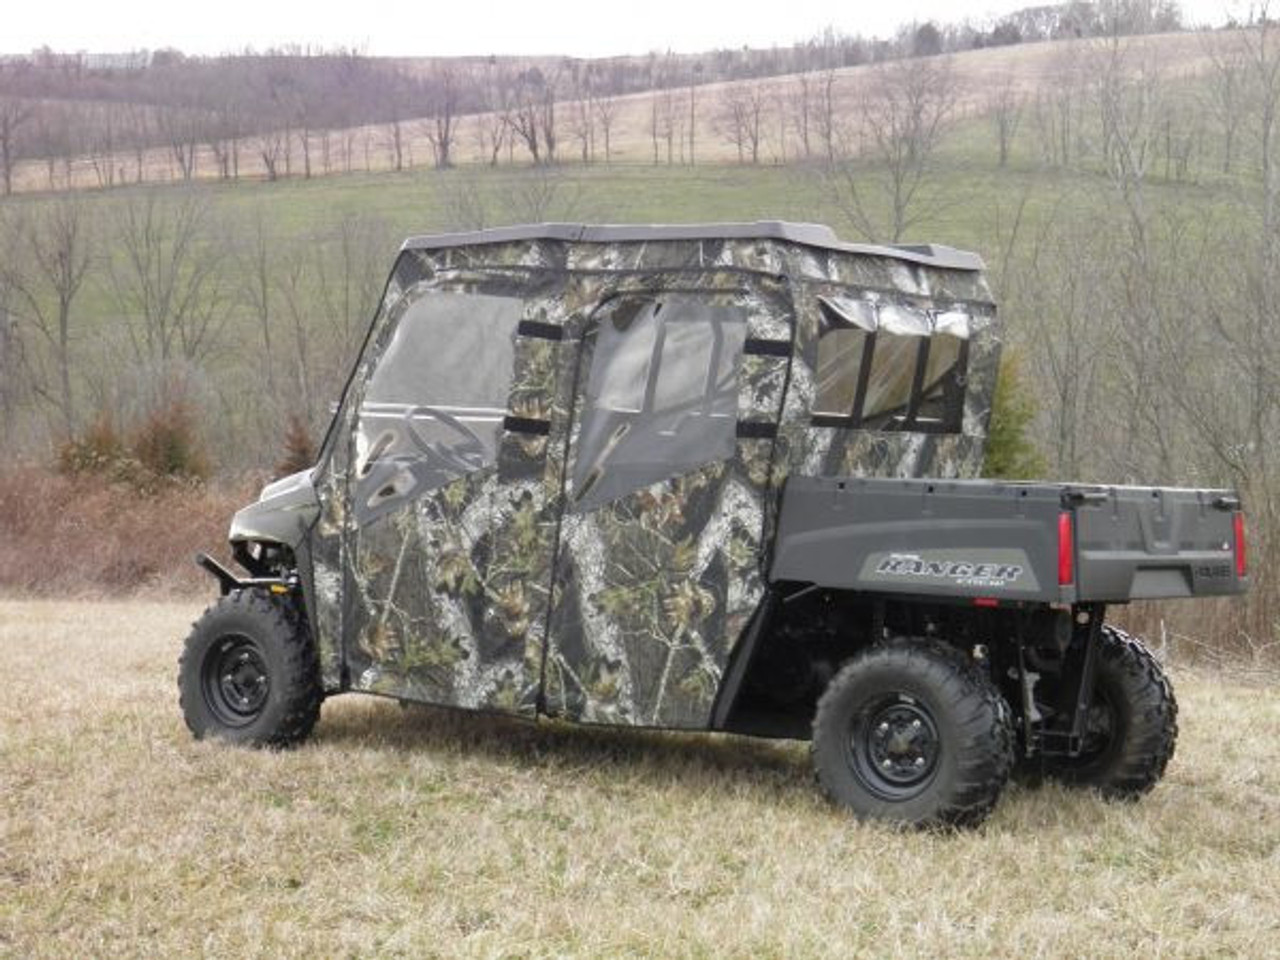 3 Star side x side Polaris Ranger Crew 570-4 full cab enclosure side angle view